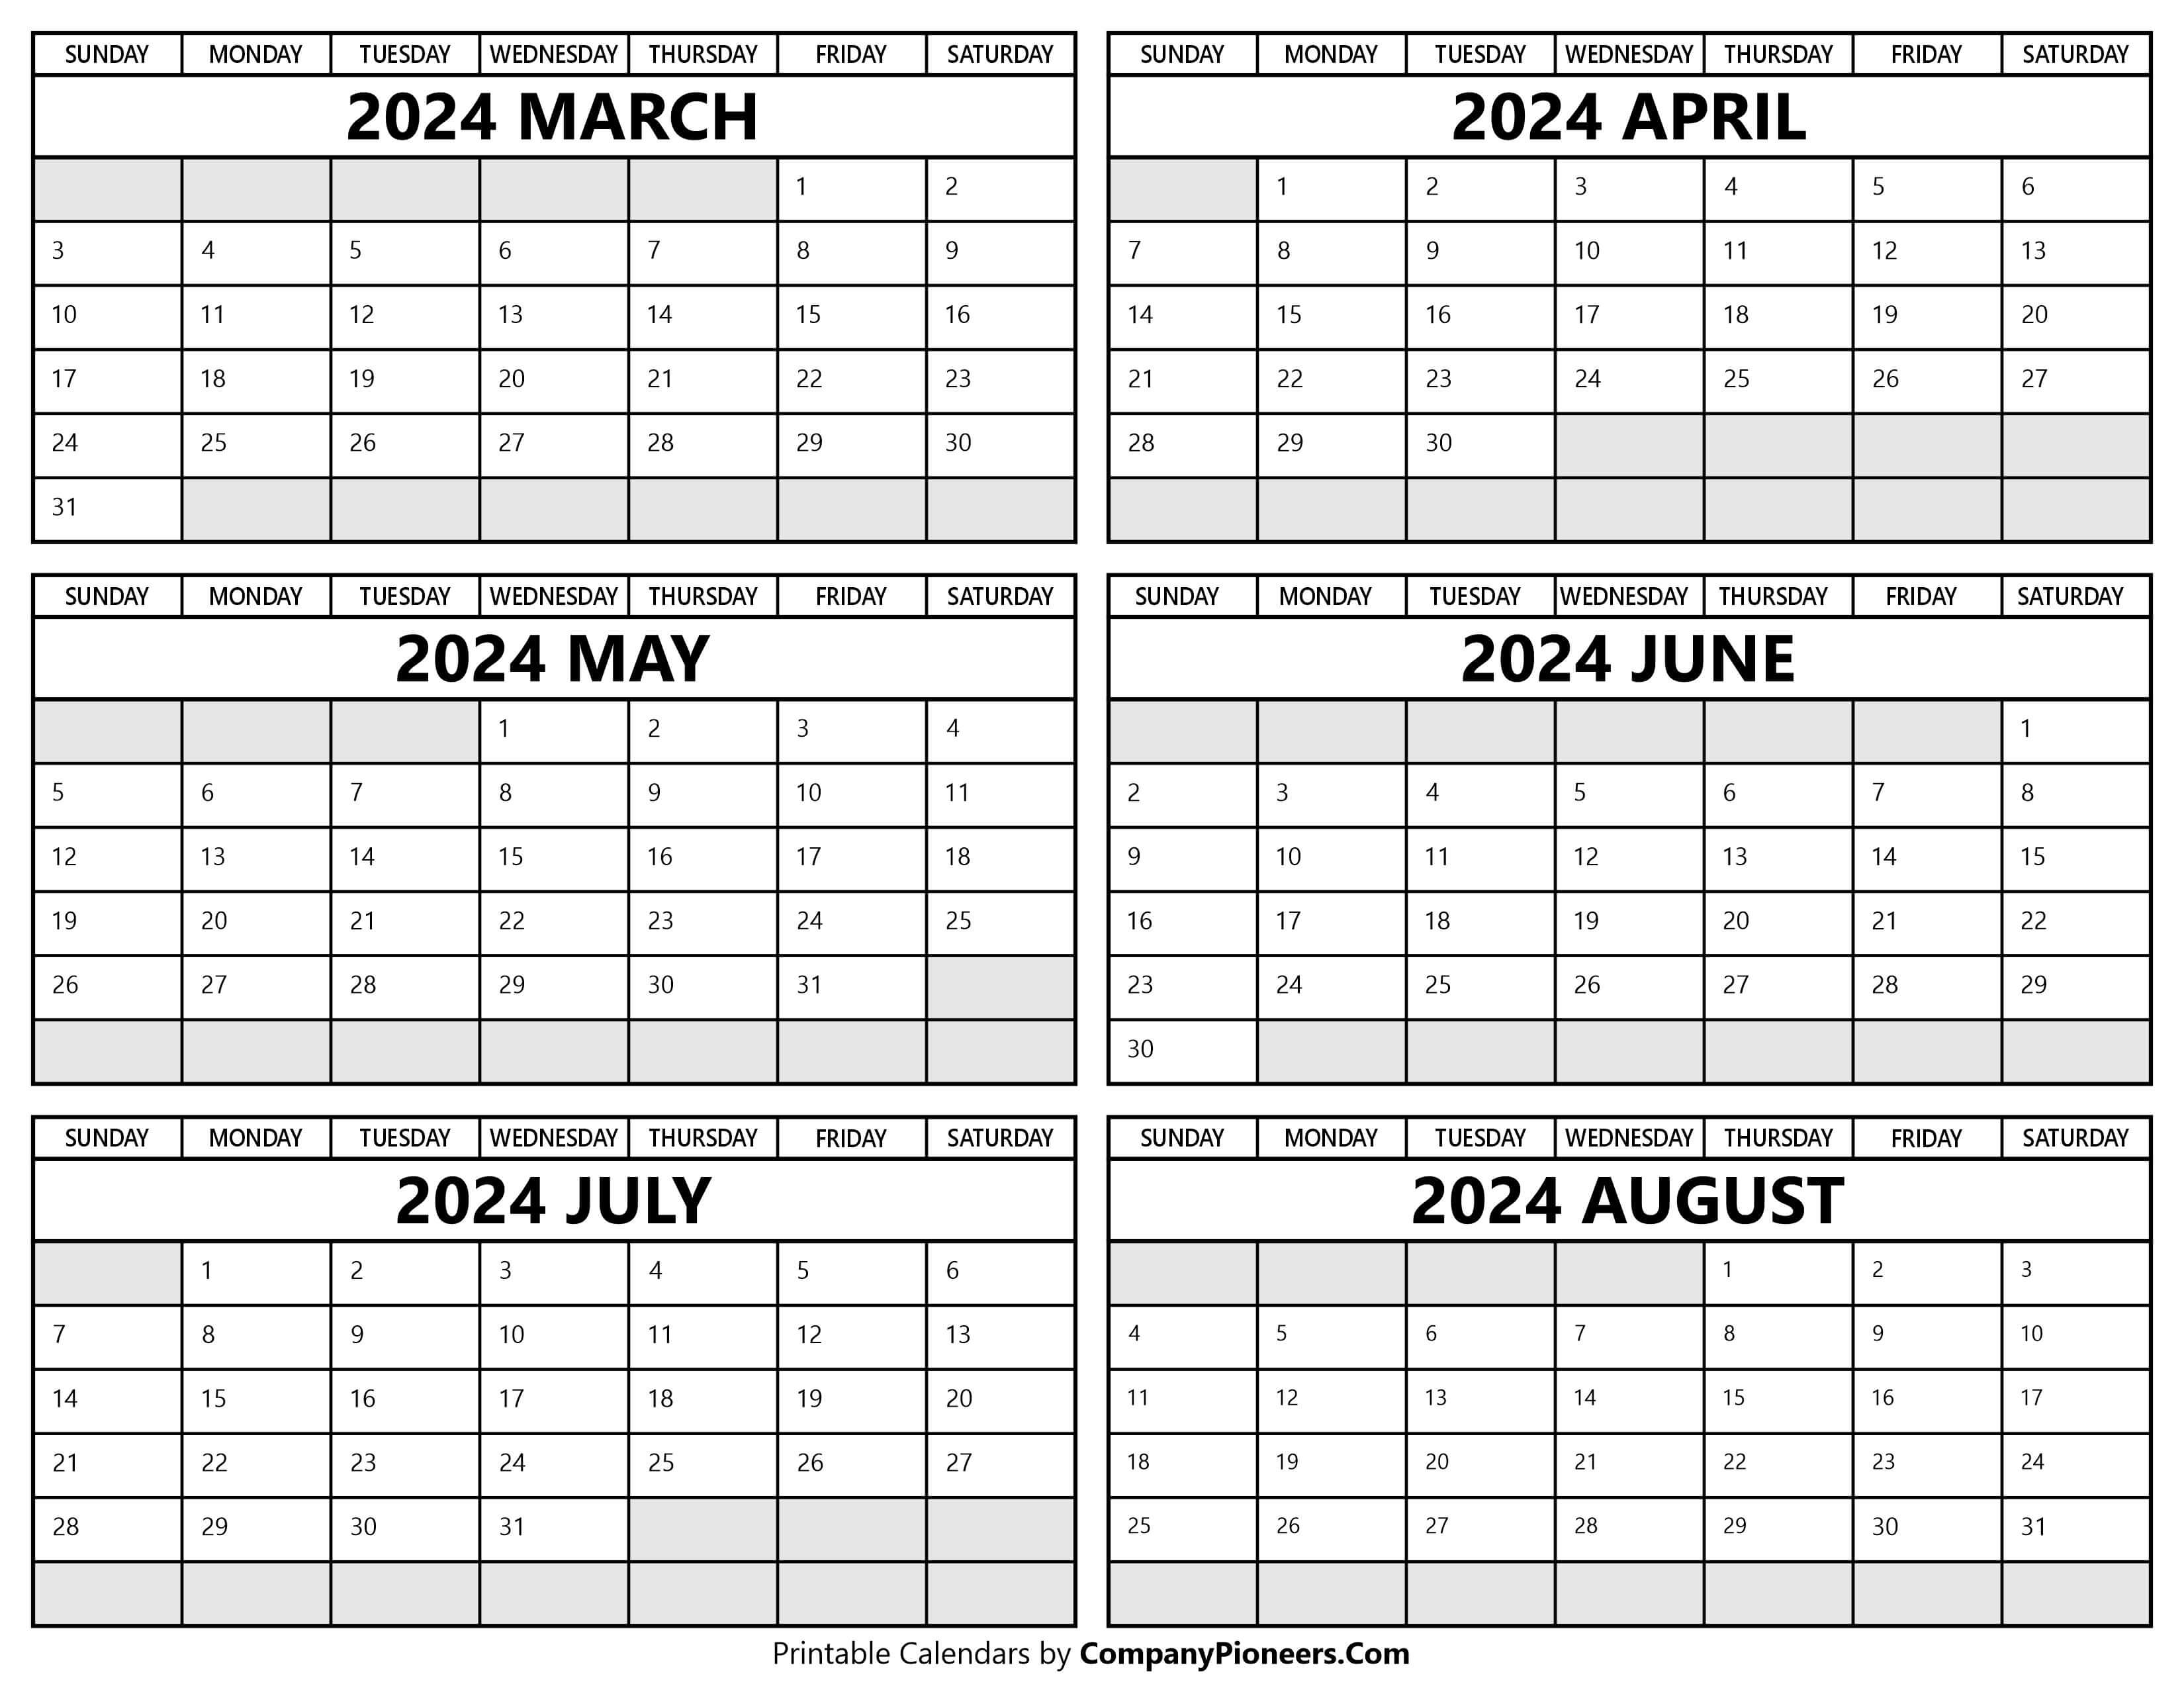 Printable 2024 March to August Calendar